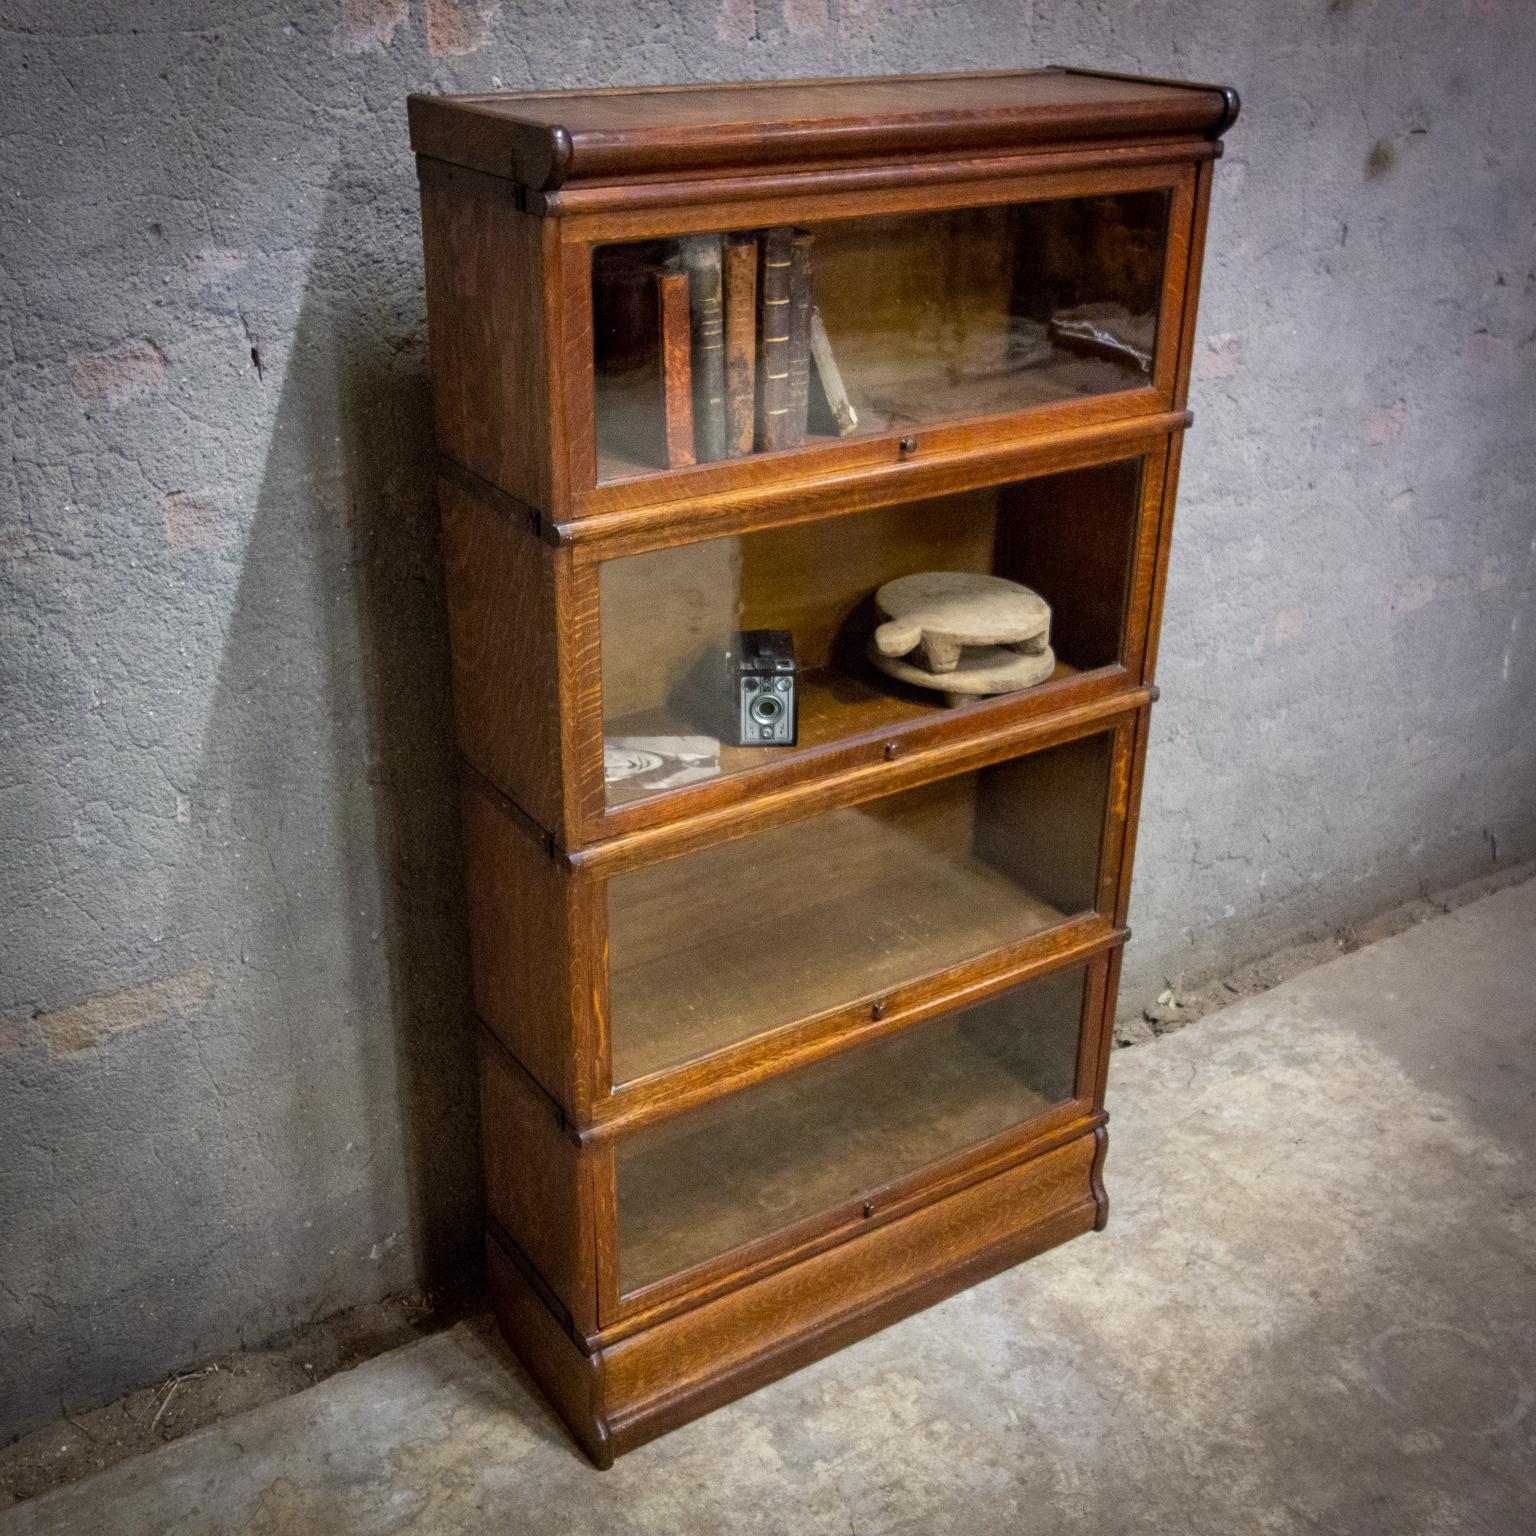 Completely original, that is this Globe Wernicke bookcase. Globe Wernicke has been around since the end of 1800 and is known for its Classic high-quality bookcases. It's always a pleasure when you pick up a book, you open the glass door by tilting